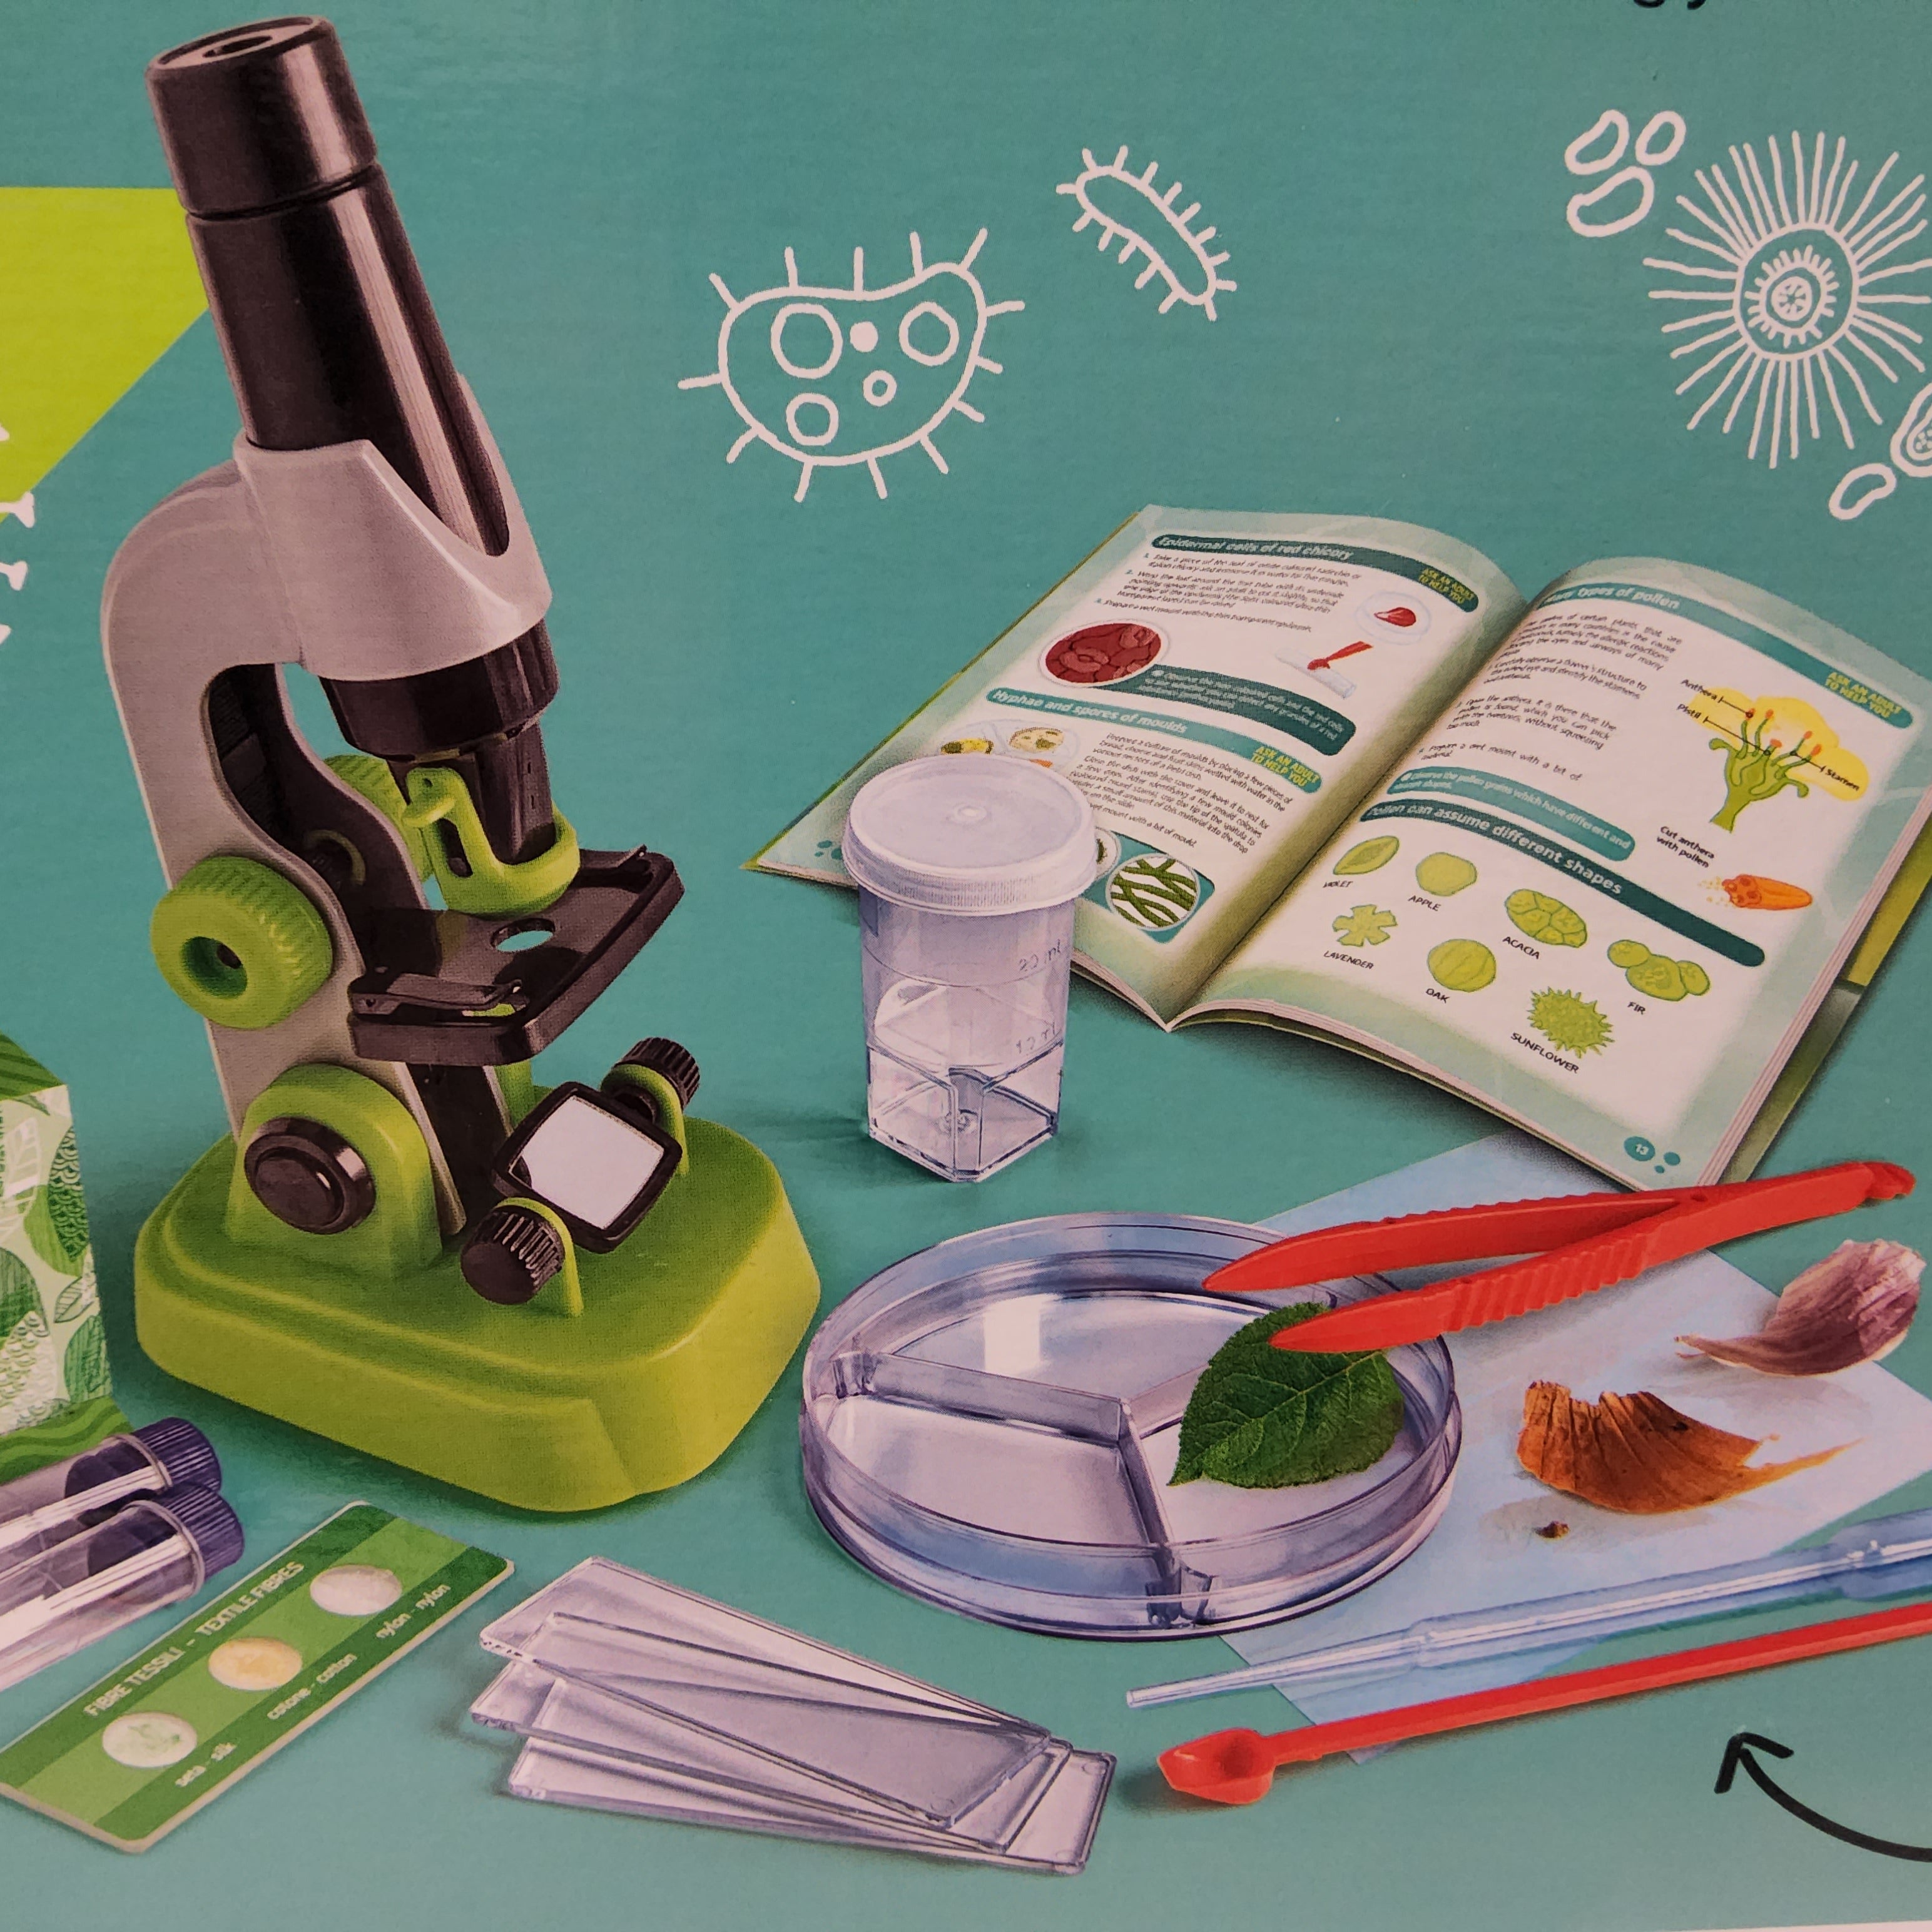 Clementoni - Science and Play - My First Microscope - 617241